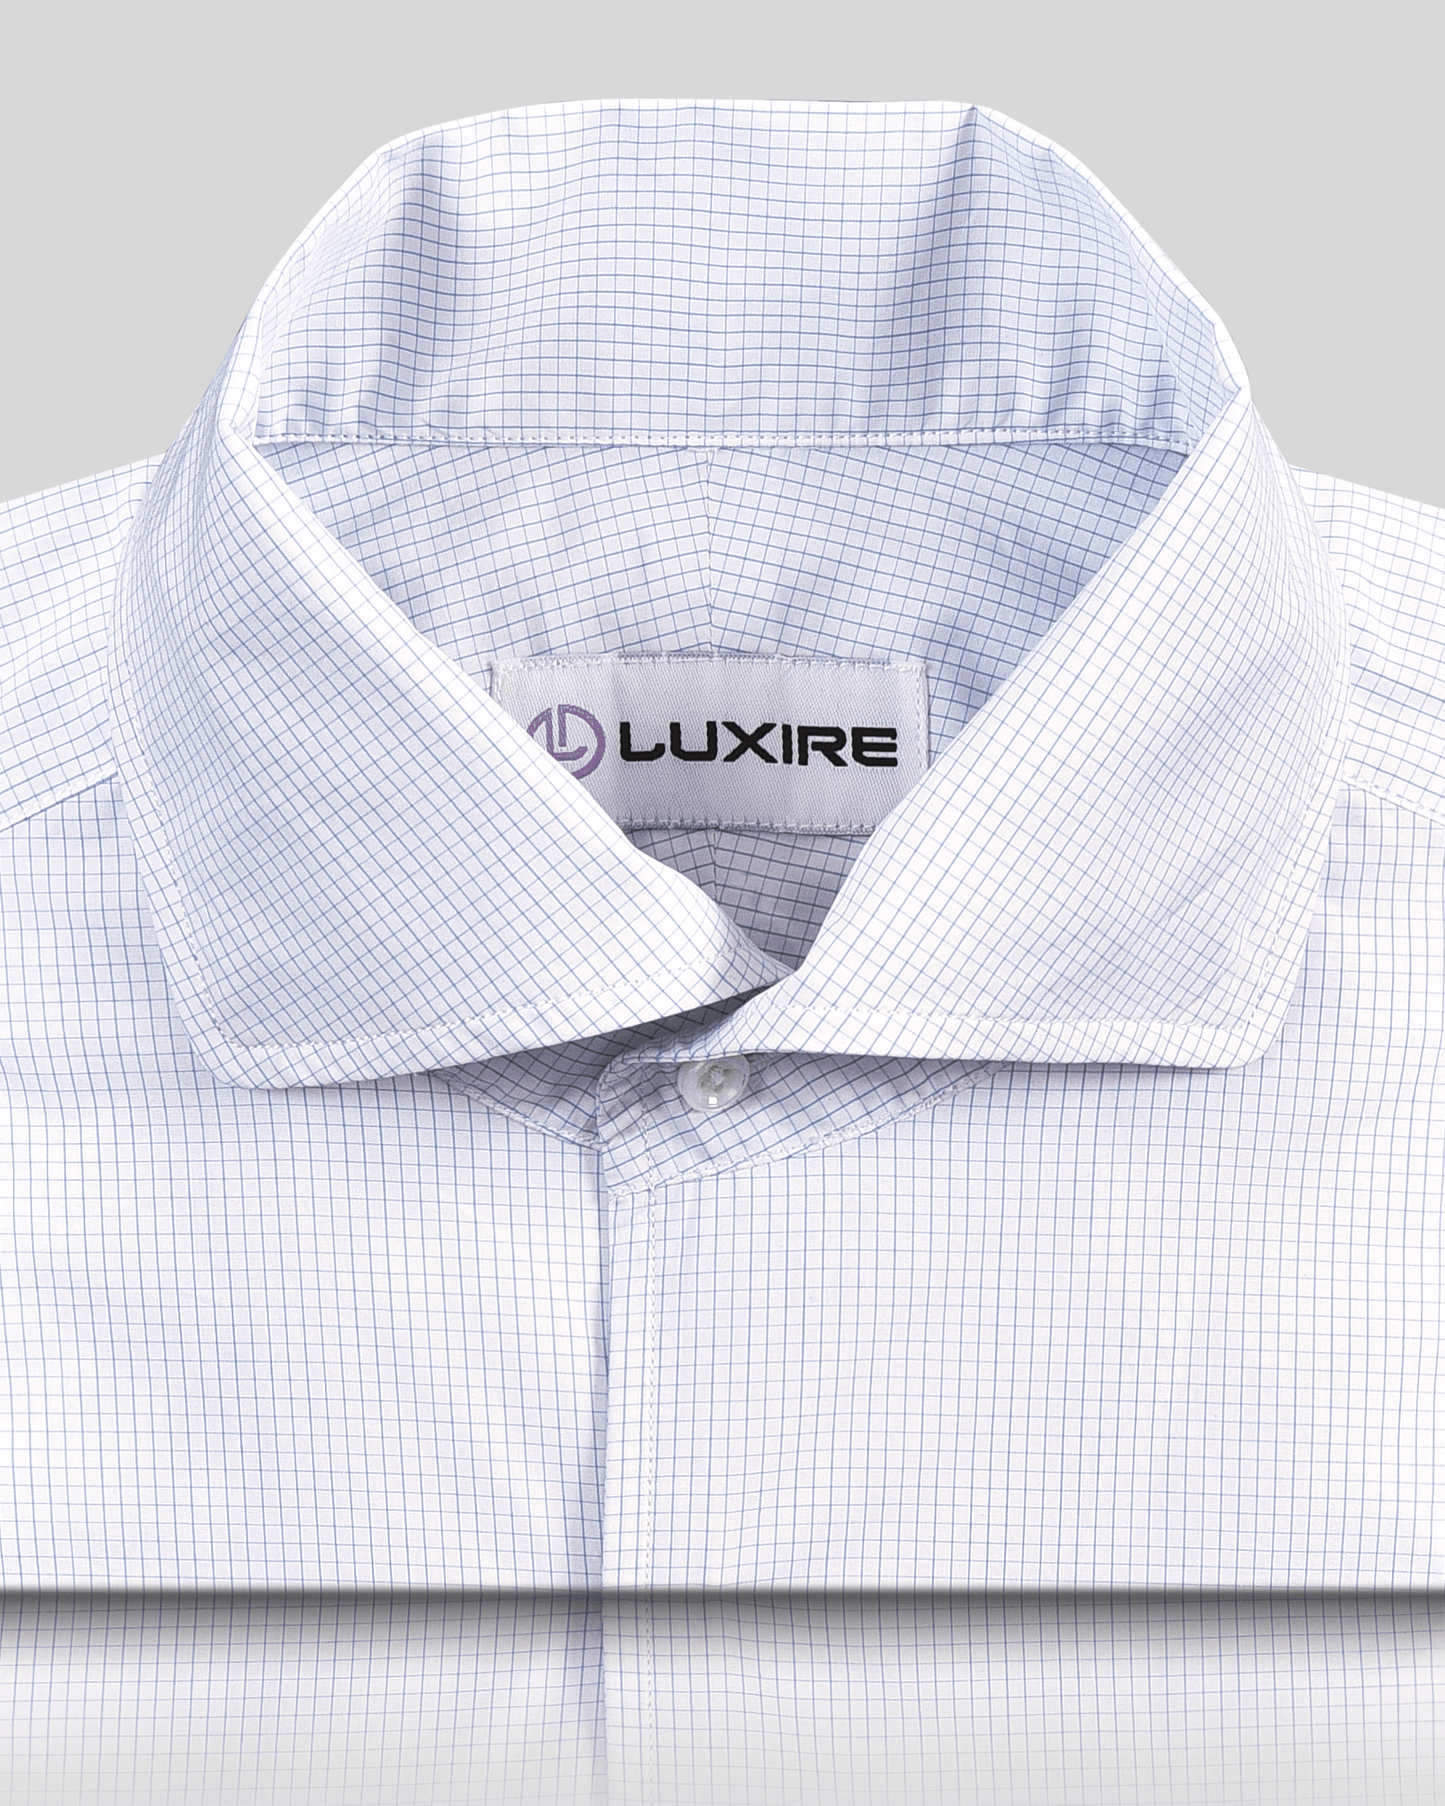 Front close view of custom check shirts for men by Luxire brembana white and blue